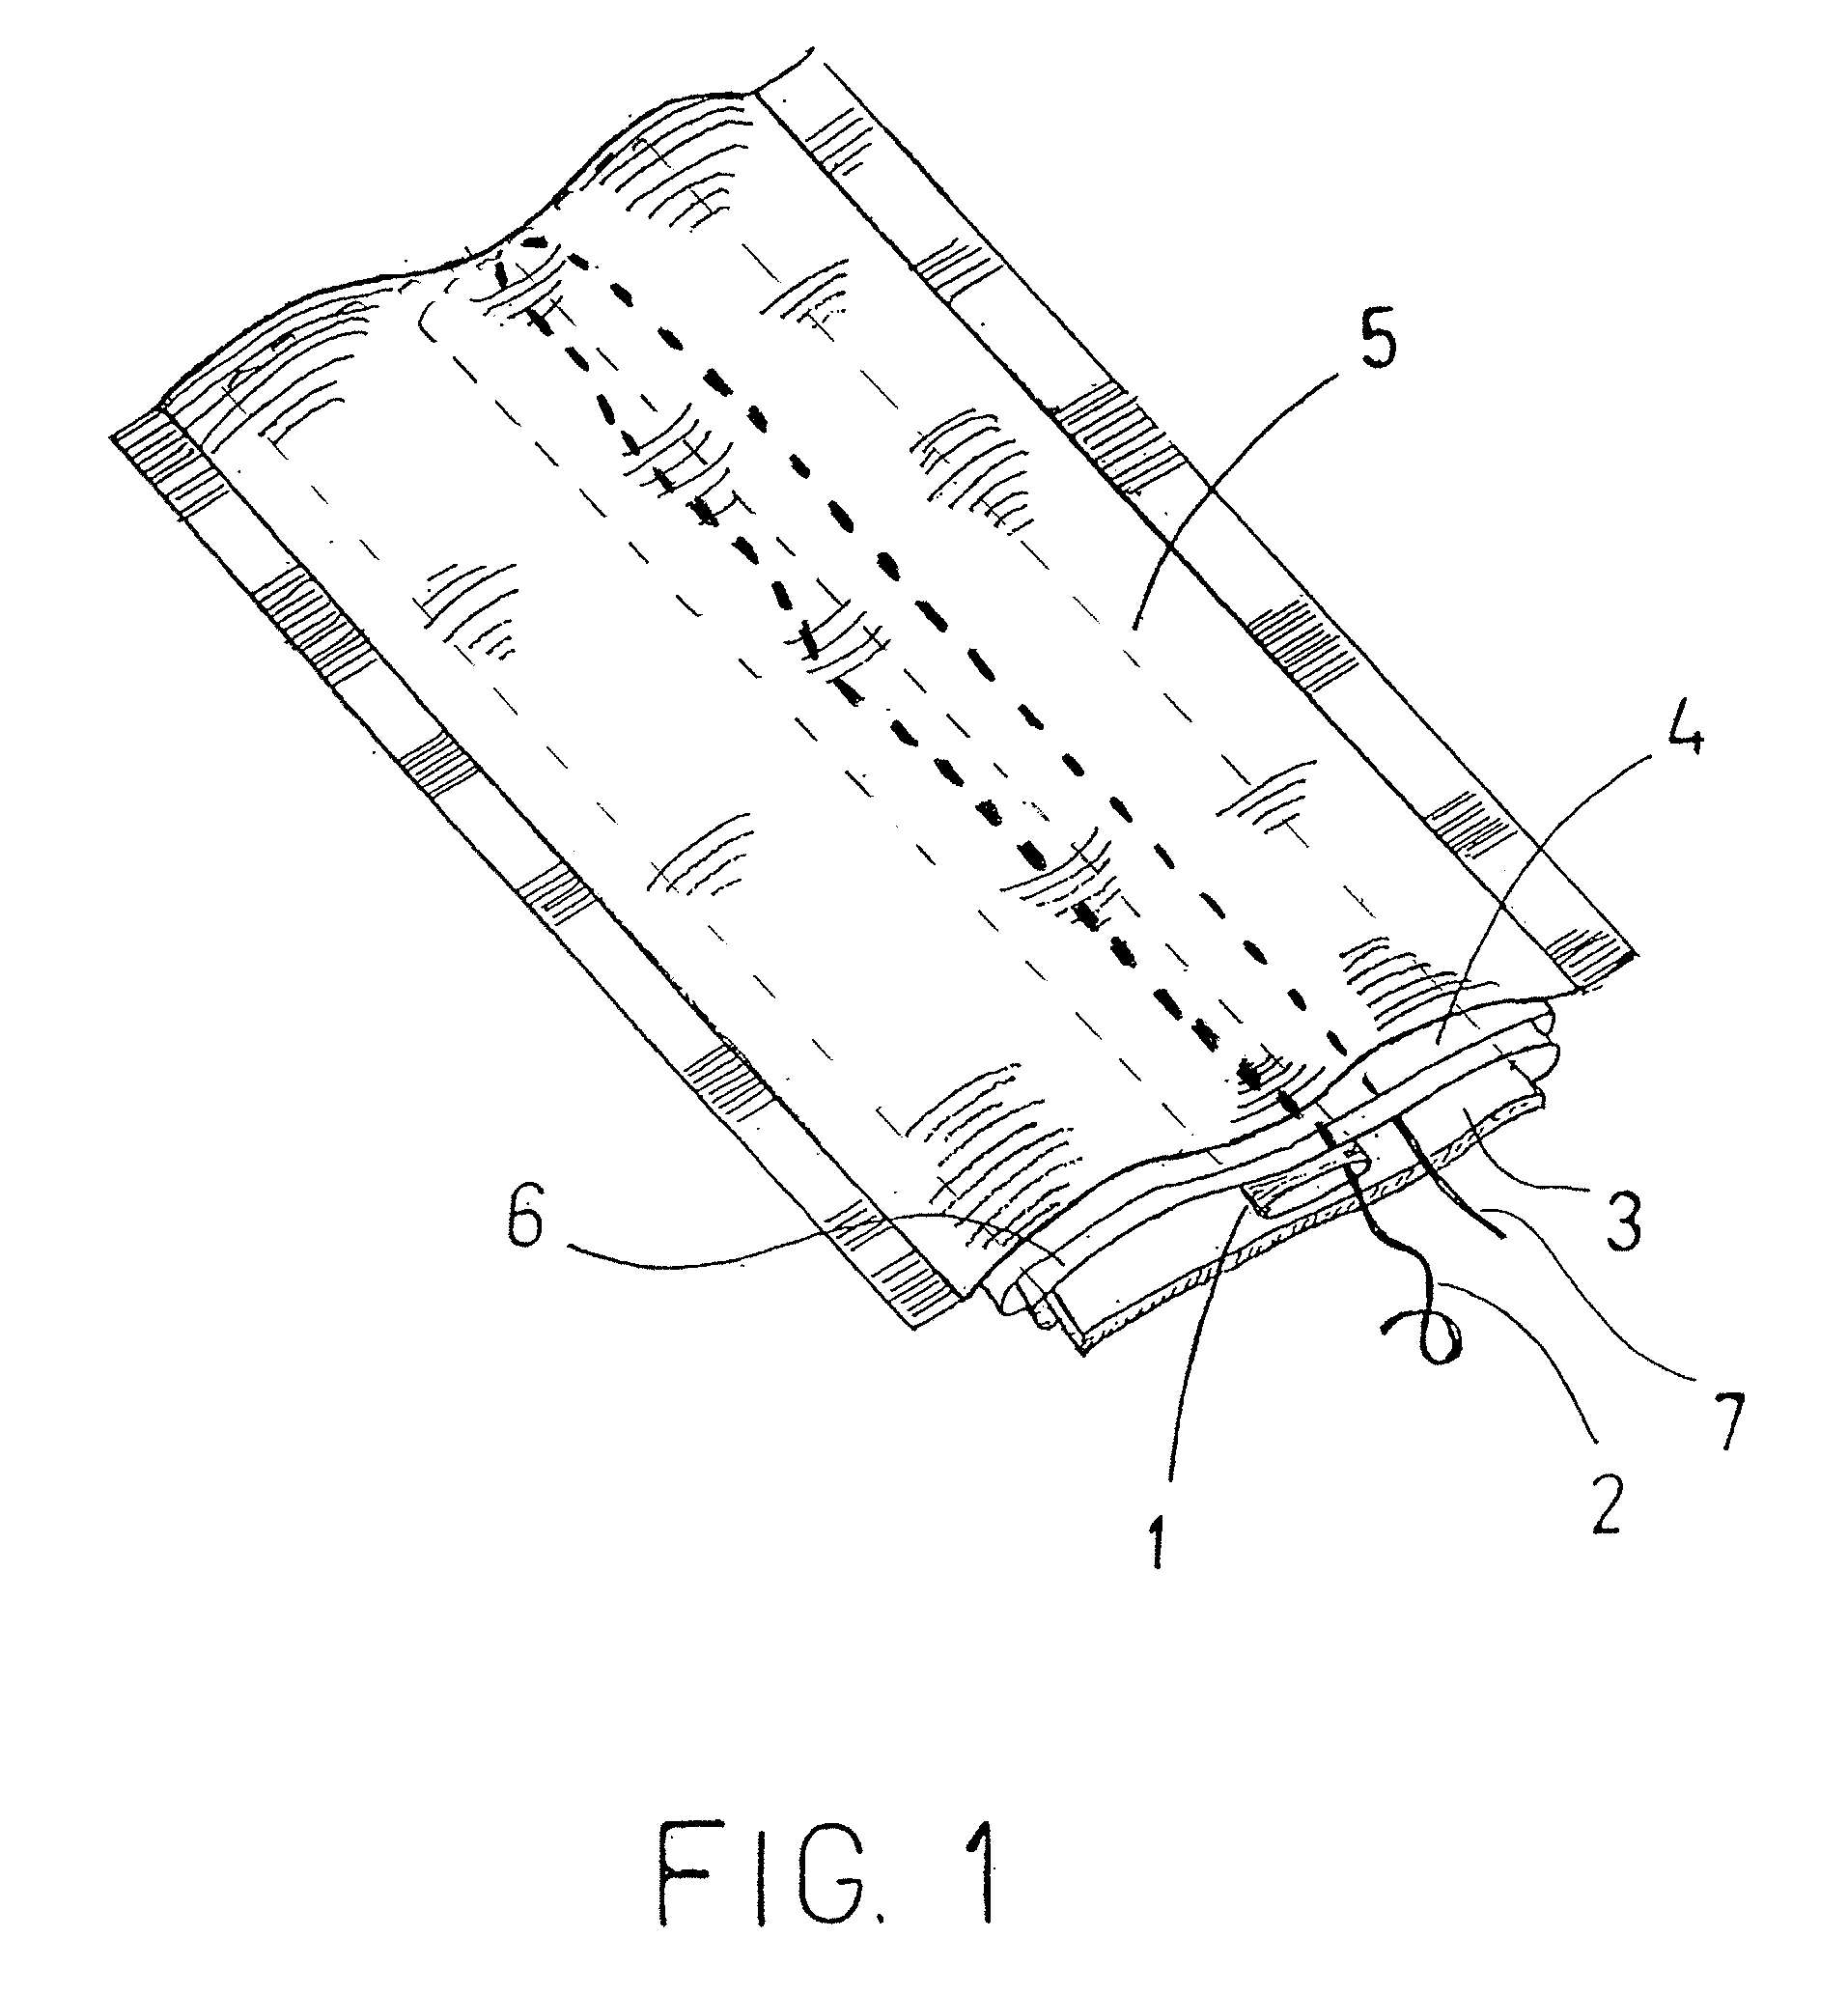 Integrated orthopedic bandage system and method for using the same